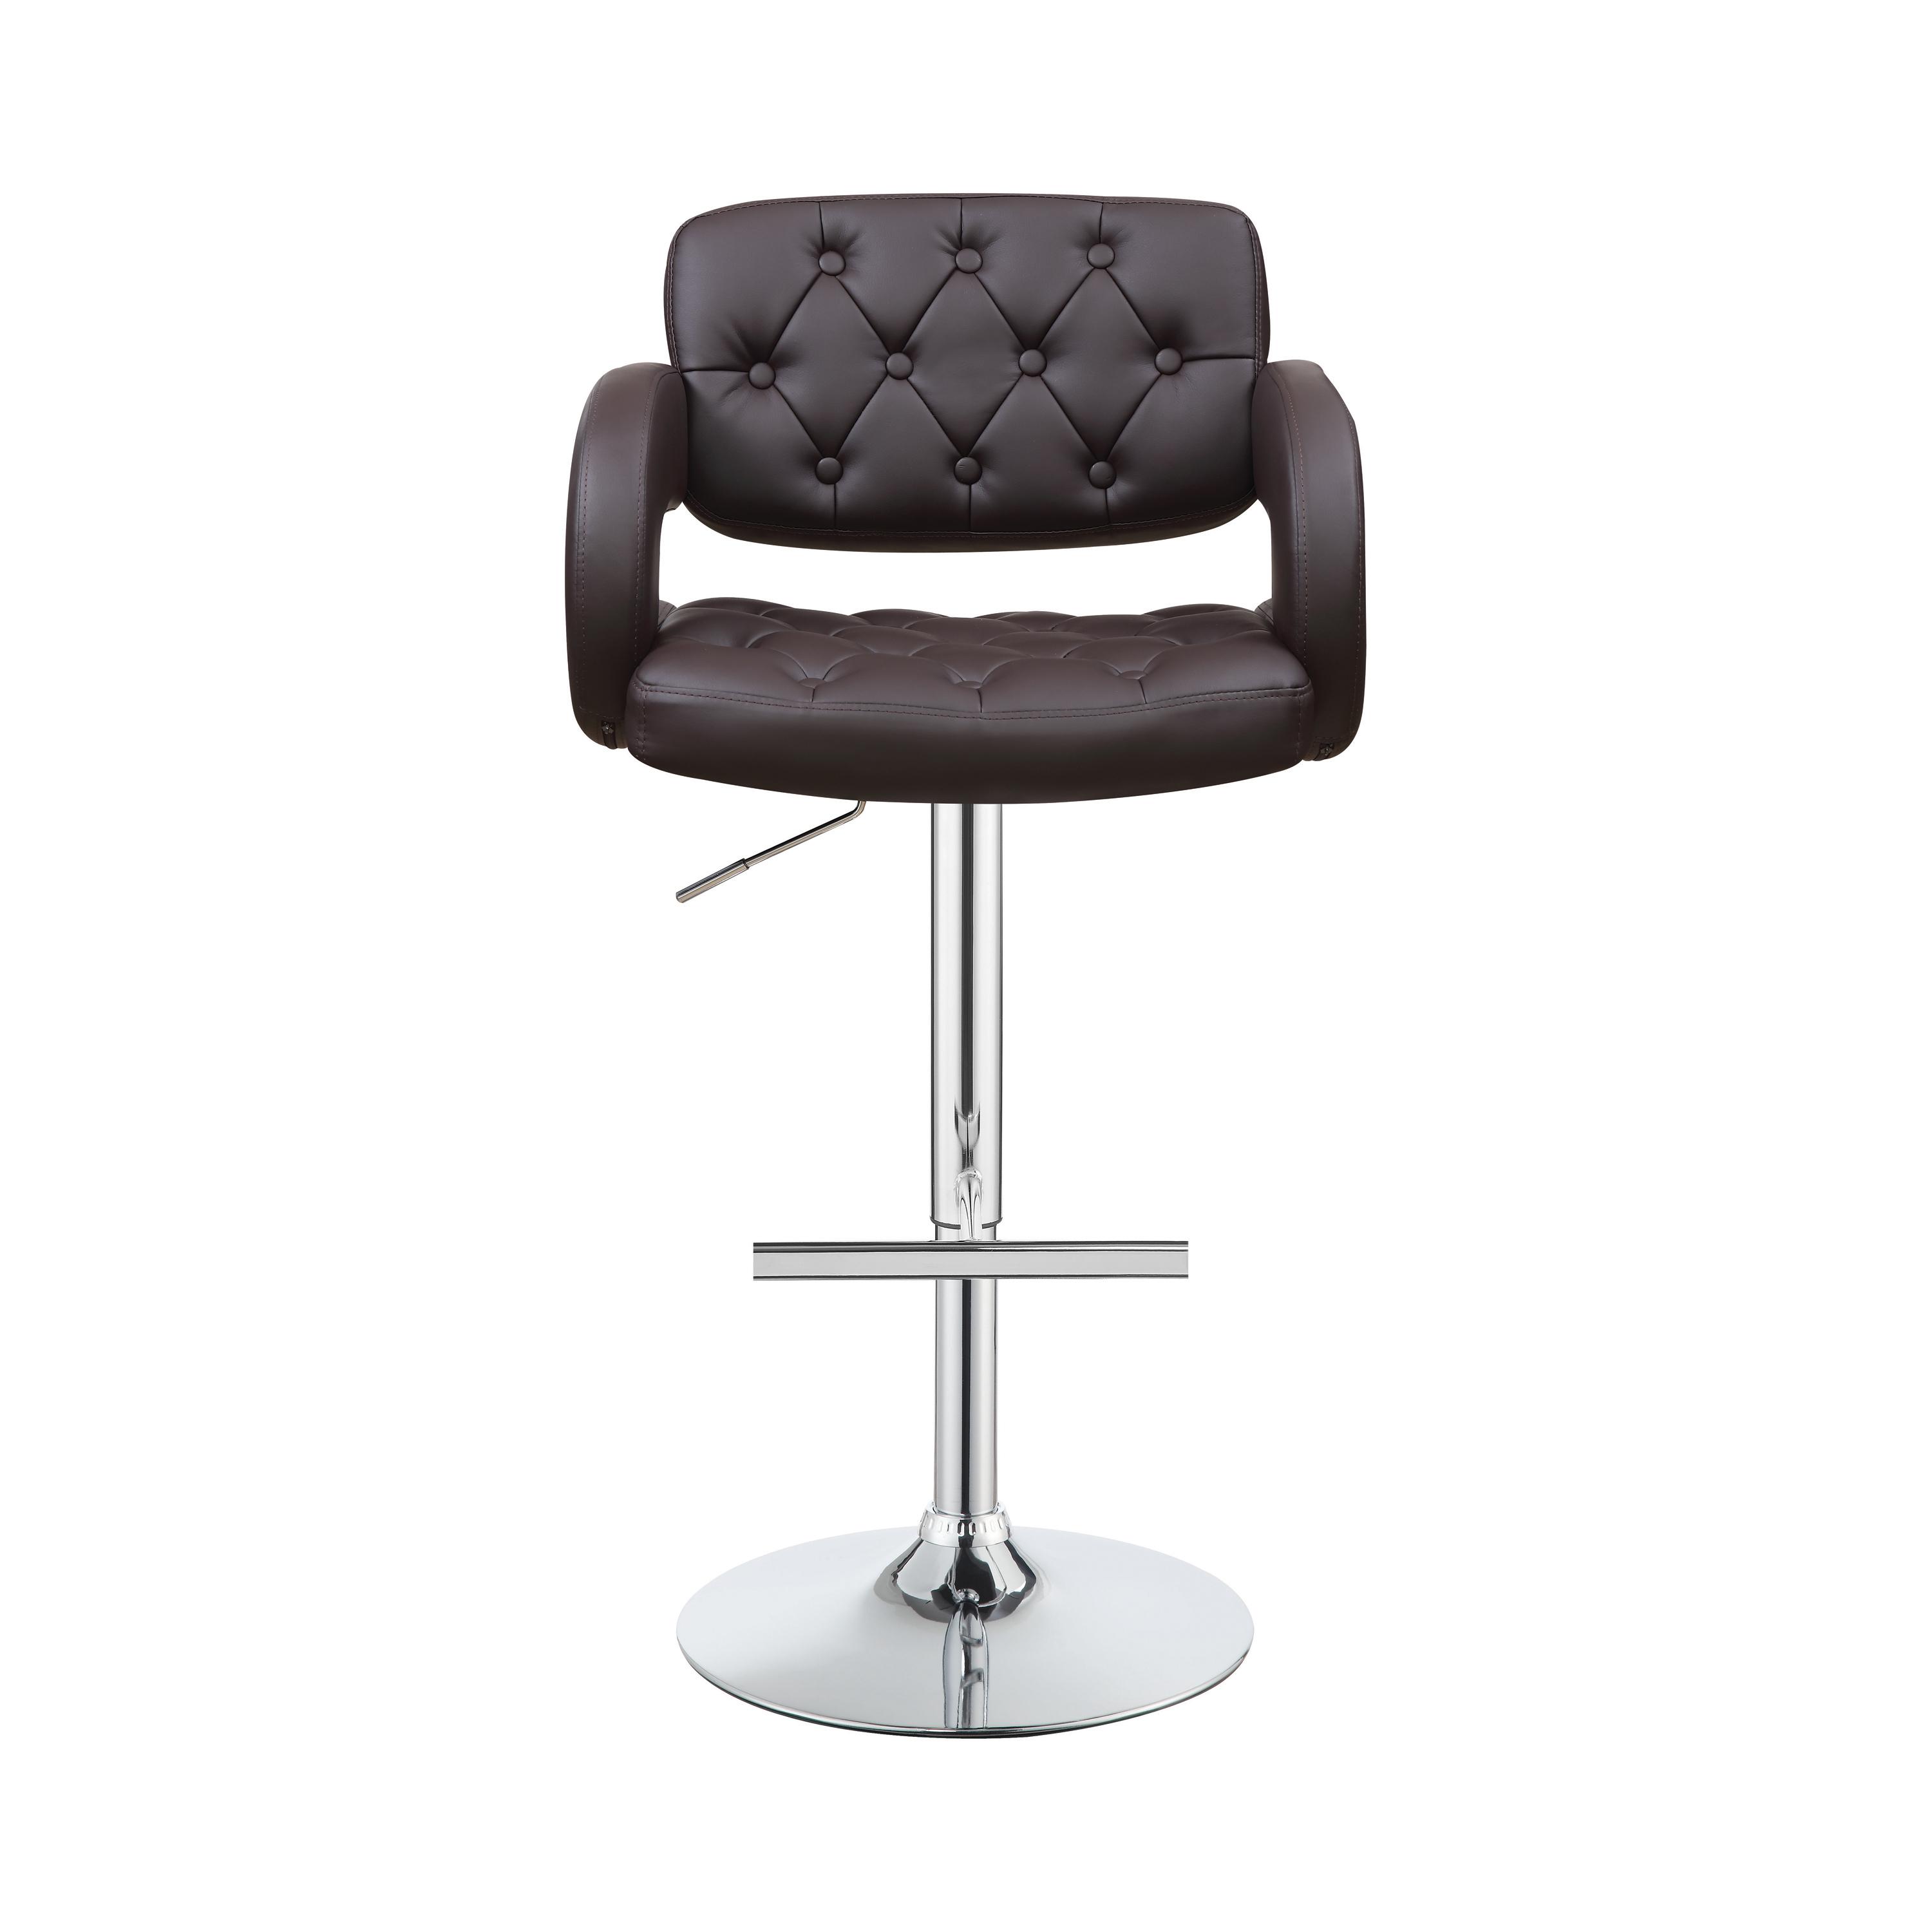 Modern Bar Stool 102556 102556 in Brown Leatherette